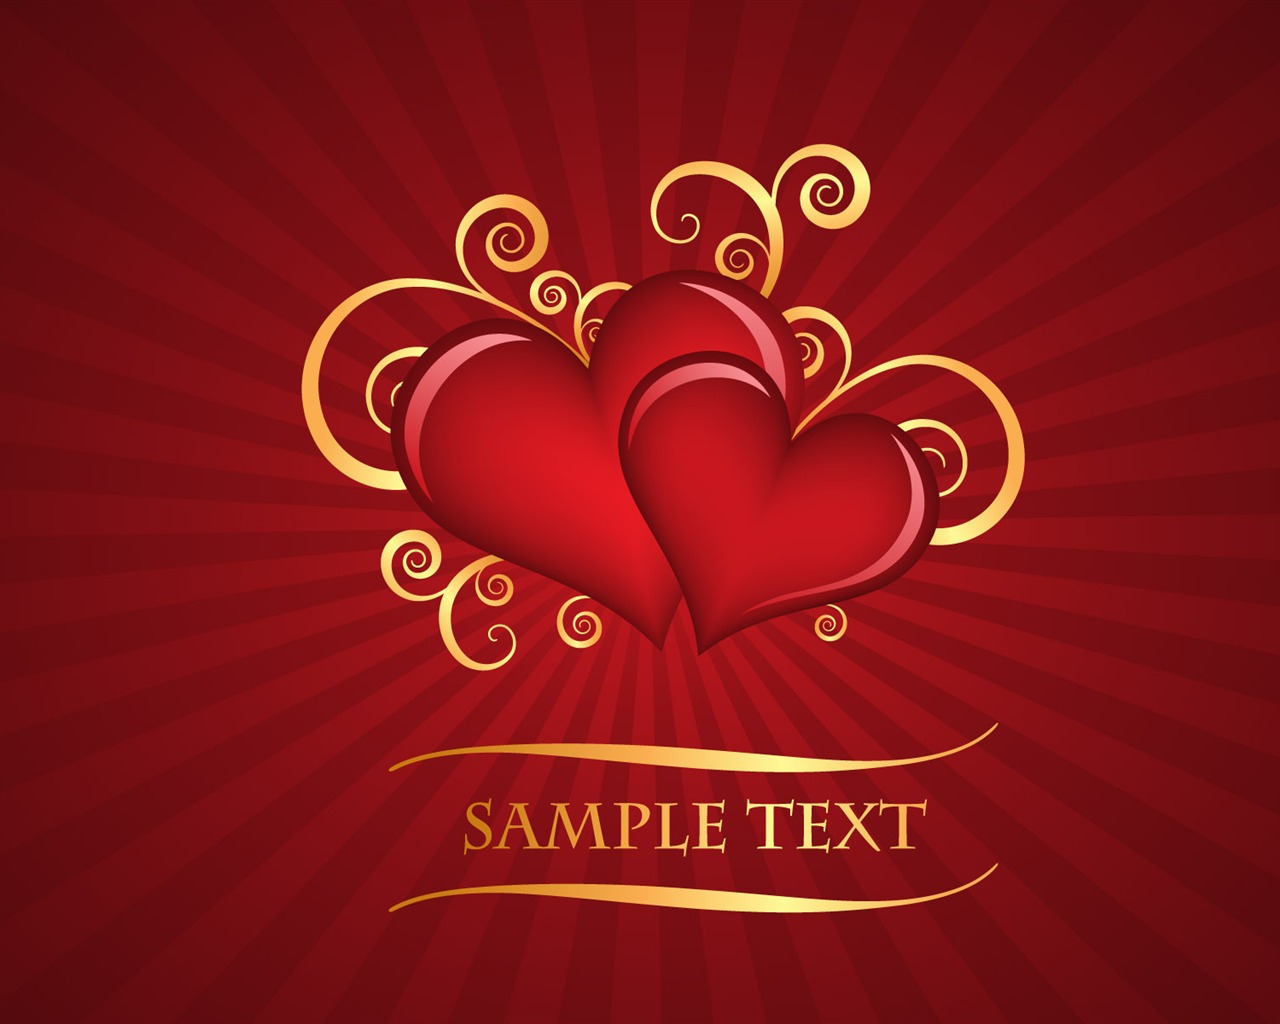 Valentine's Day Theme Wallpapers (6) #9 - 1280x1024